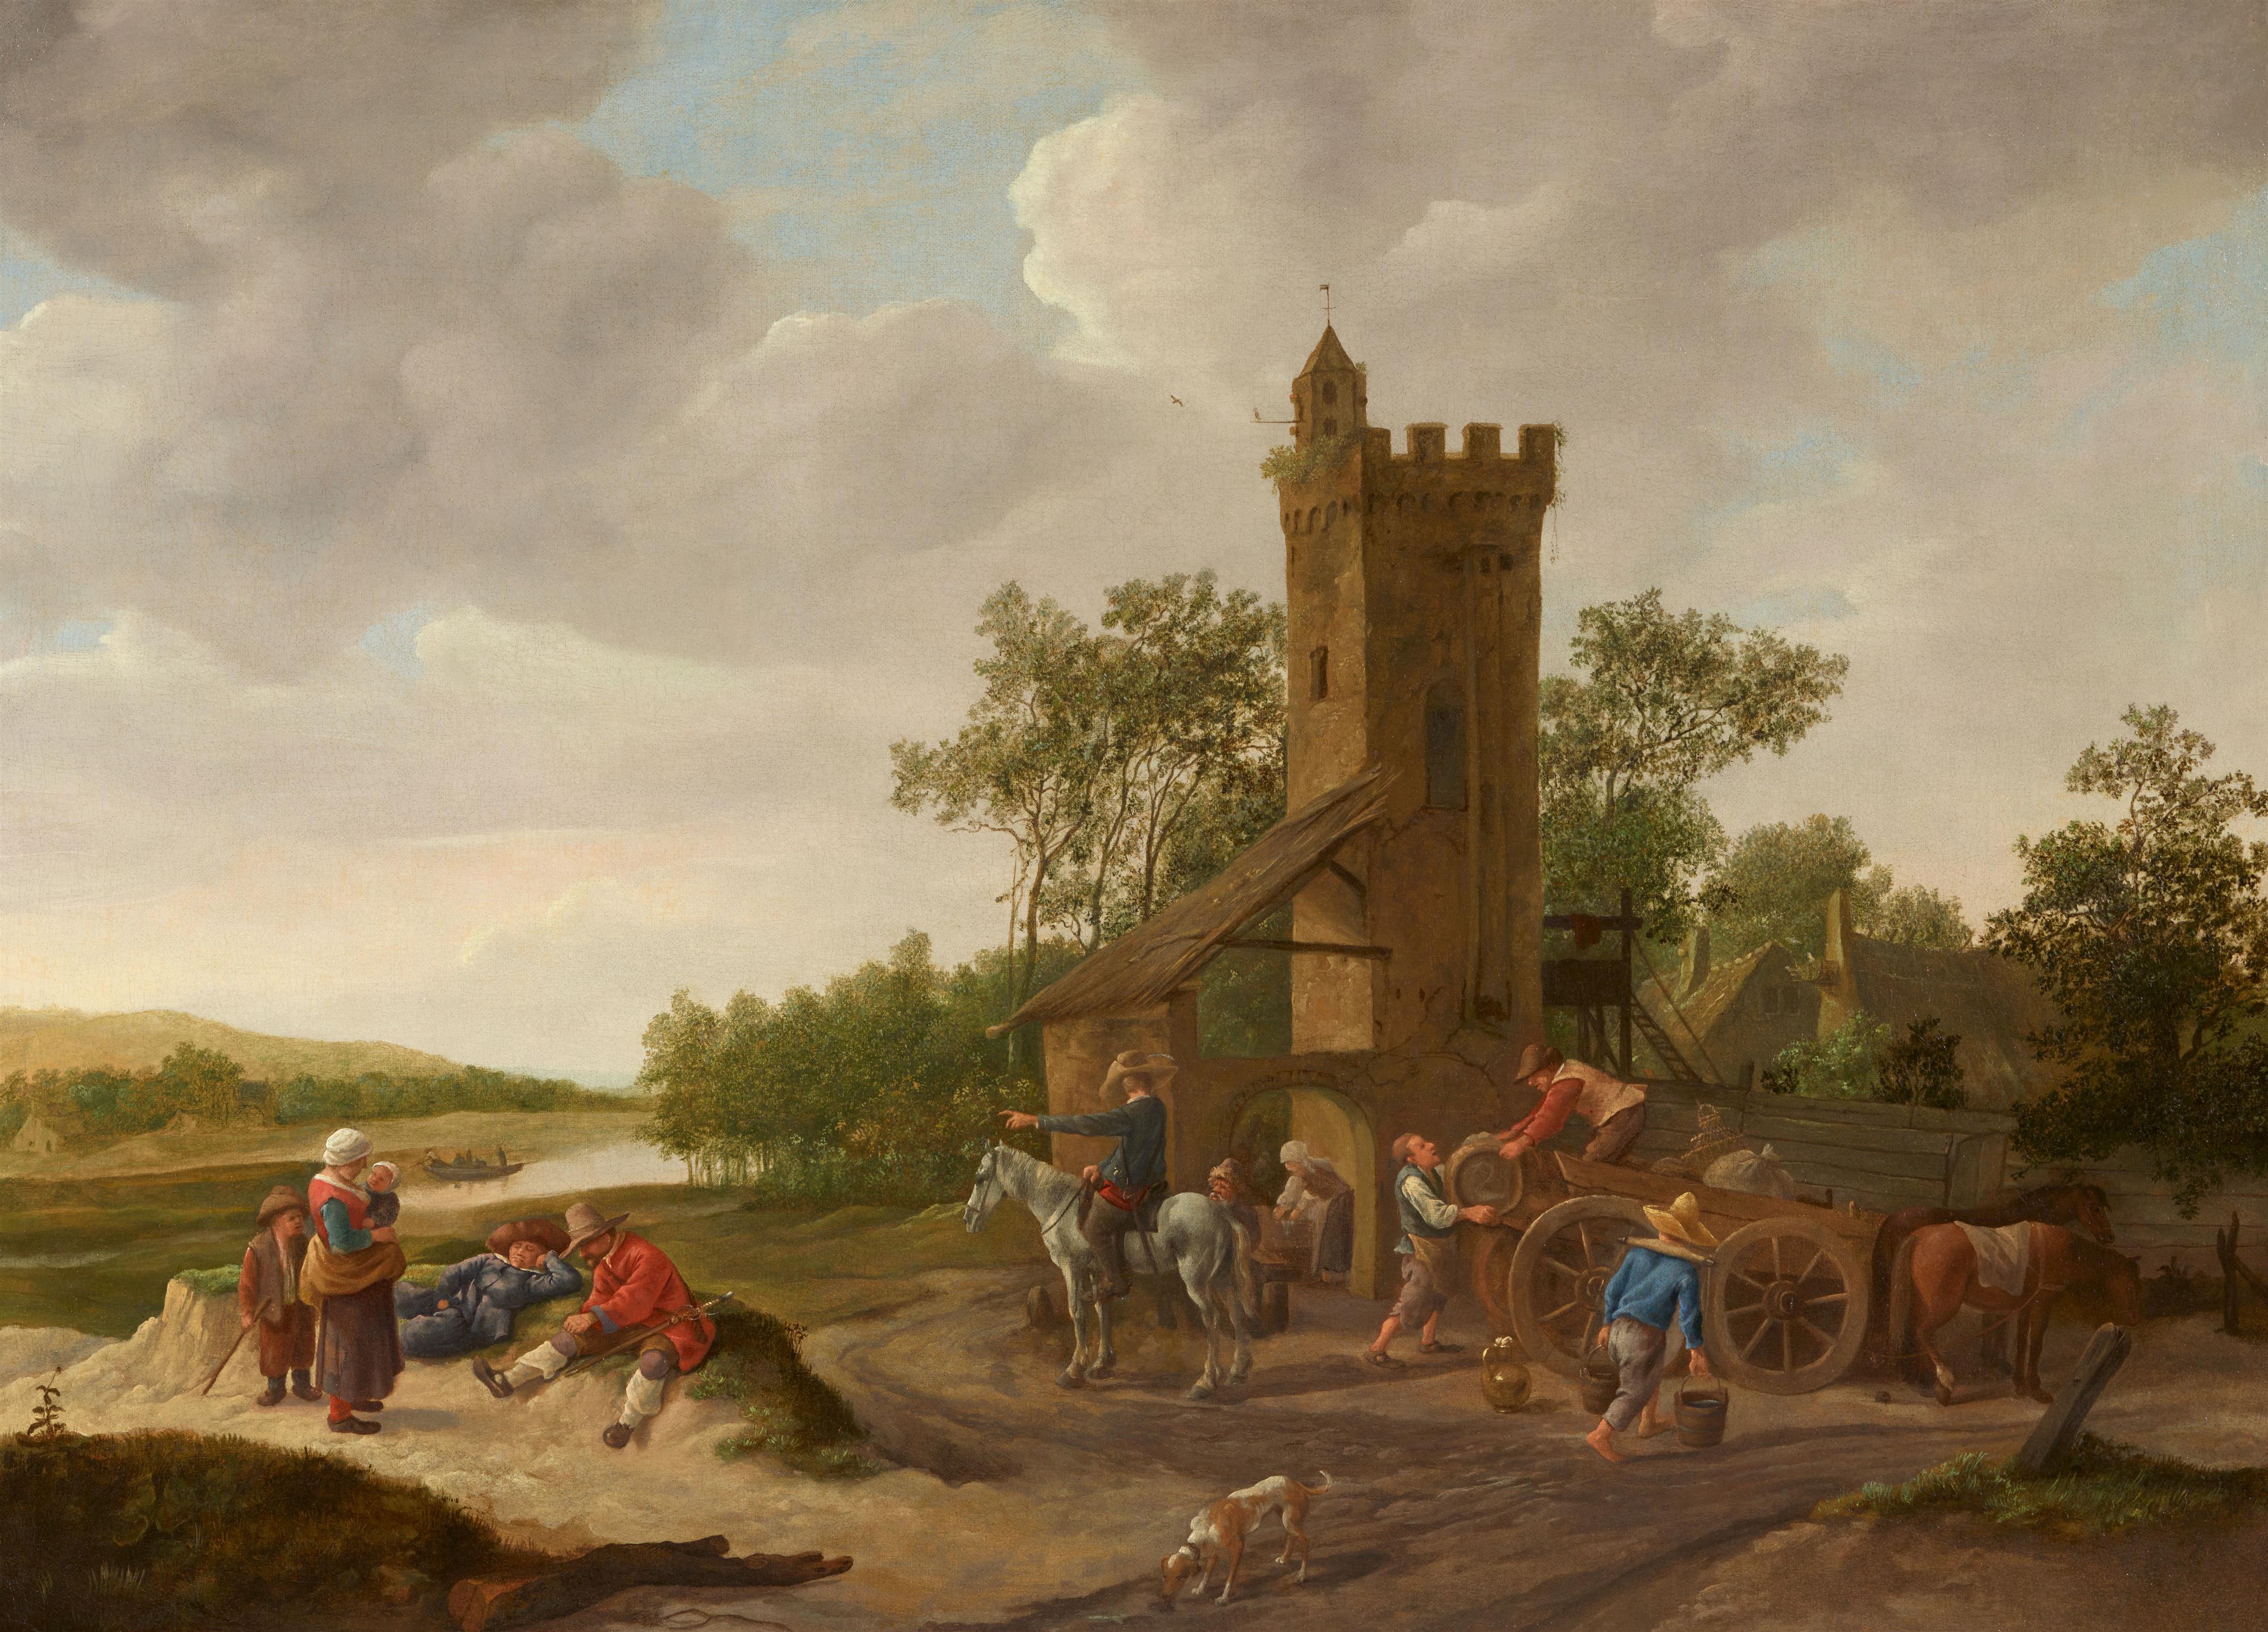 Jan Steen - Landscape with a River and a Tower, in front of which men are loading or unloading a Cart alongside other Figures, including a Horseman, a Mother with Children and two Resting Men. - image-1